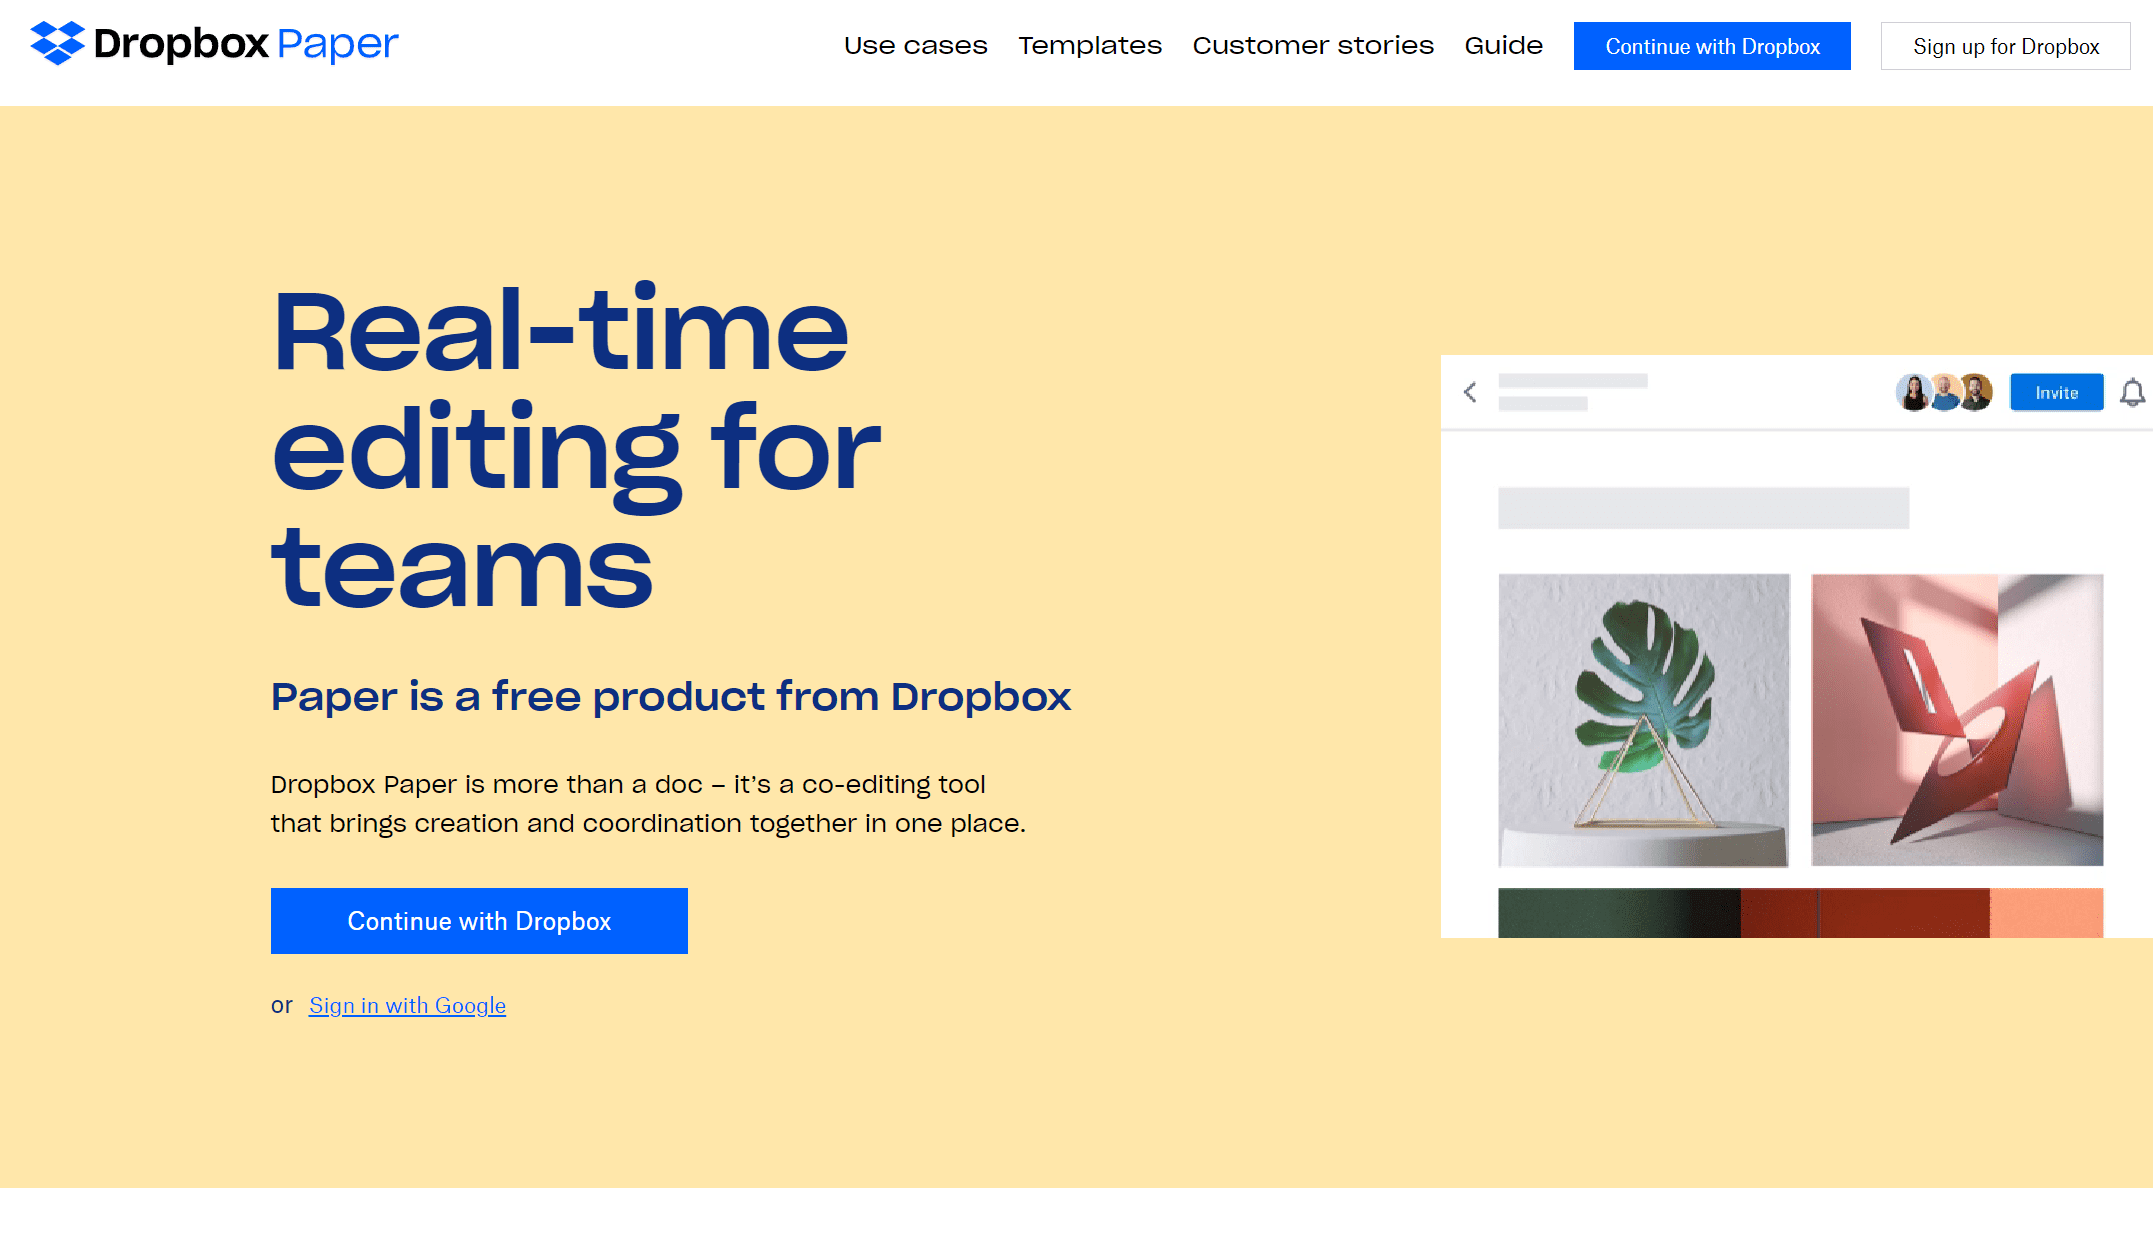 Dropbox Paper homescreen: Real-time editing for teams.